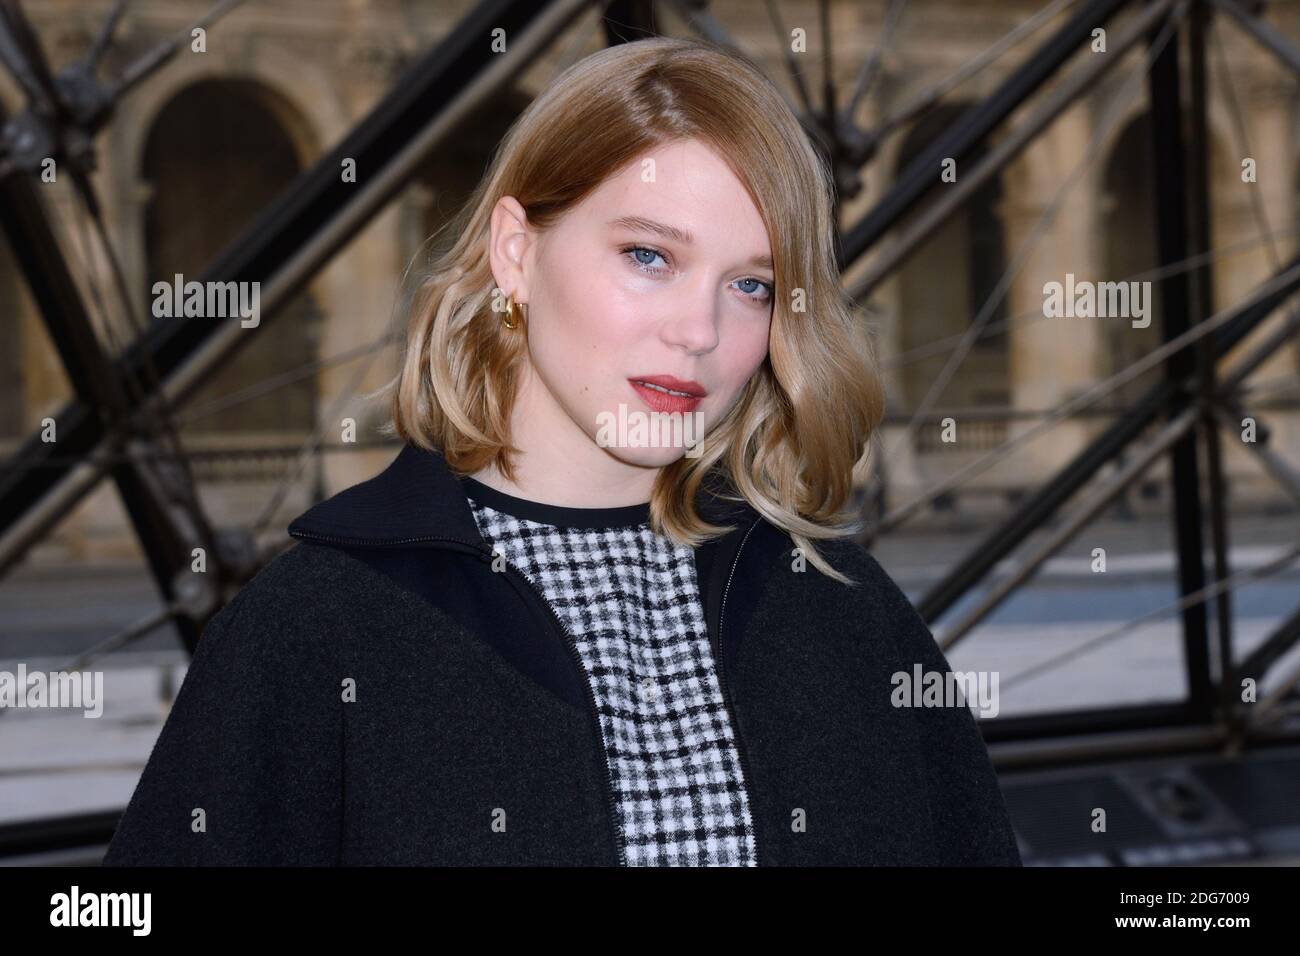 Lea Seydoux and Adele Exarchopoulos (pregnant) attending the Louis Vuitton  show during Paris Fashion Week Ready to wear FallWinter 2017-18 on March  07, 2017 at the Louvre museum in Paris, France. Photo